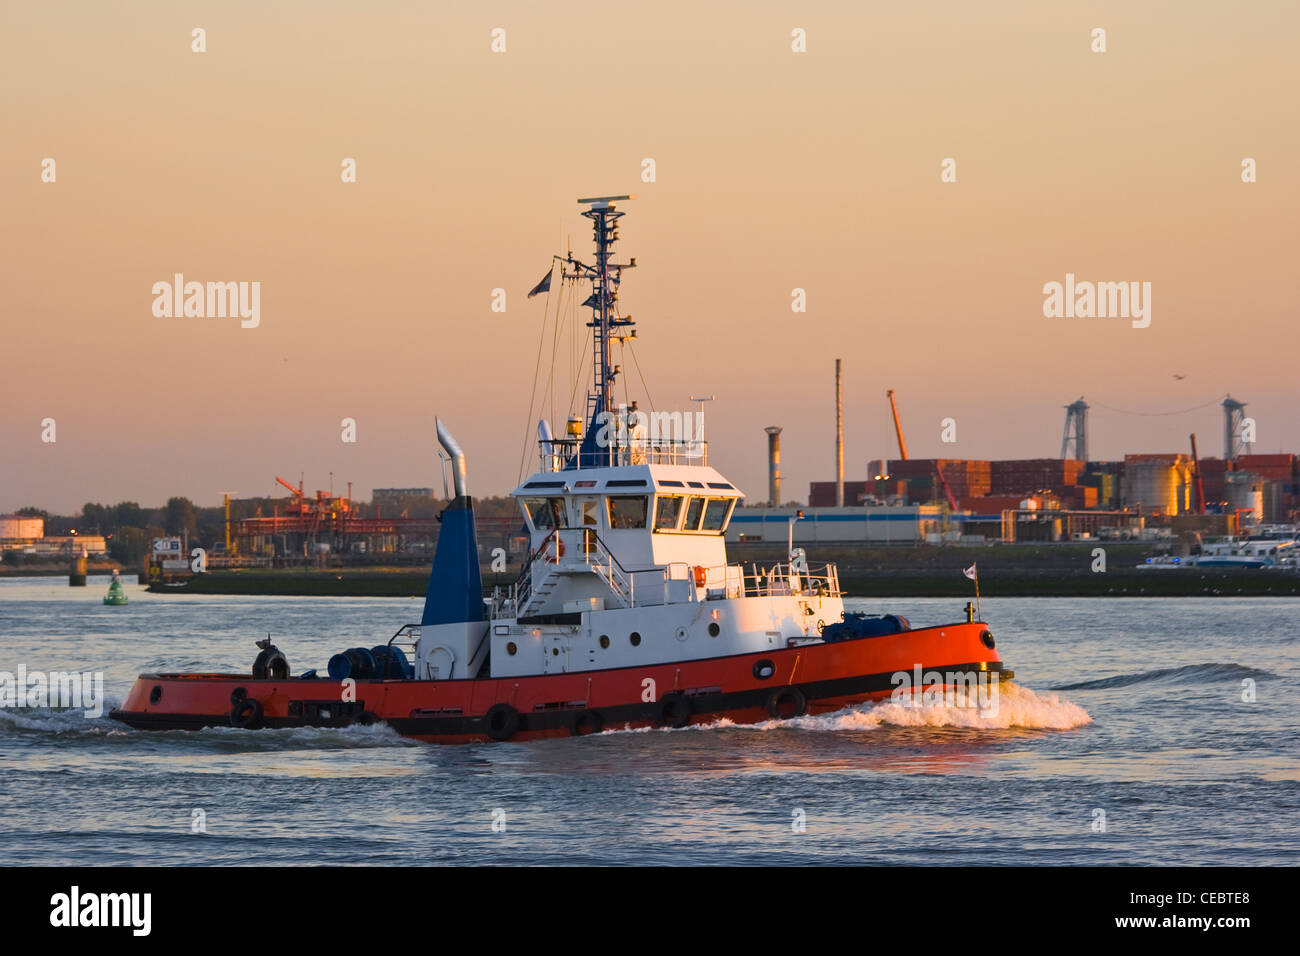 Tug passing by on the river at sunset with industry in background Stock Photo